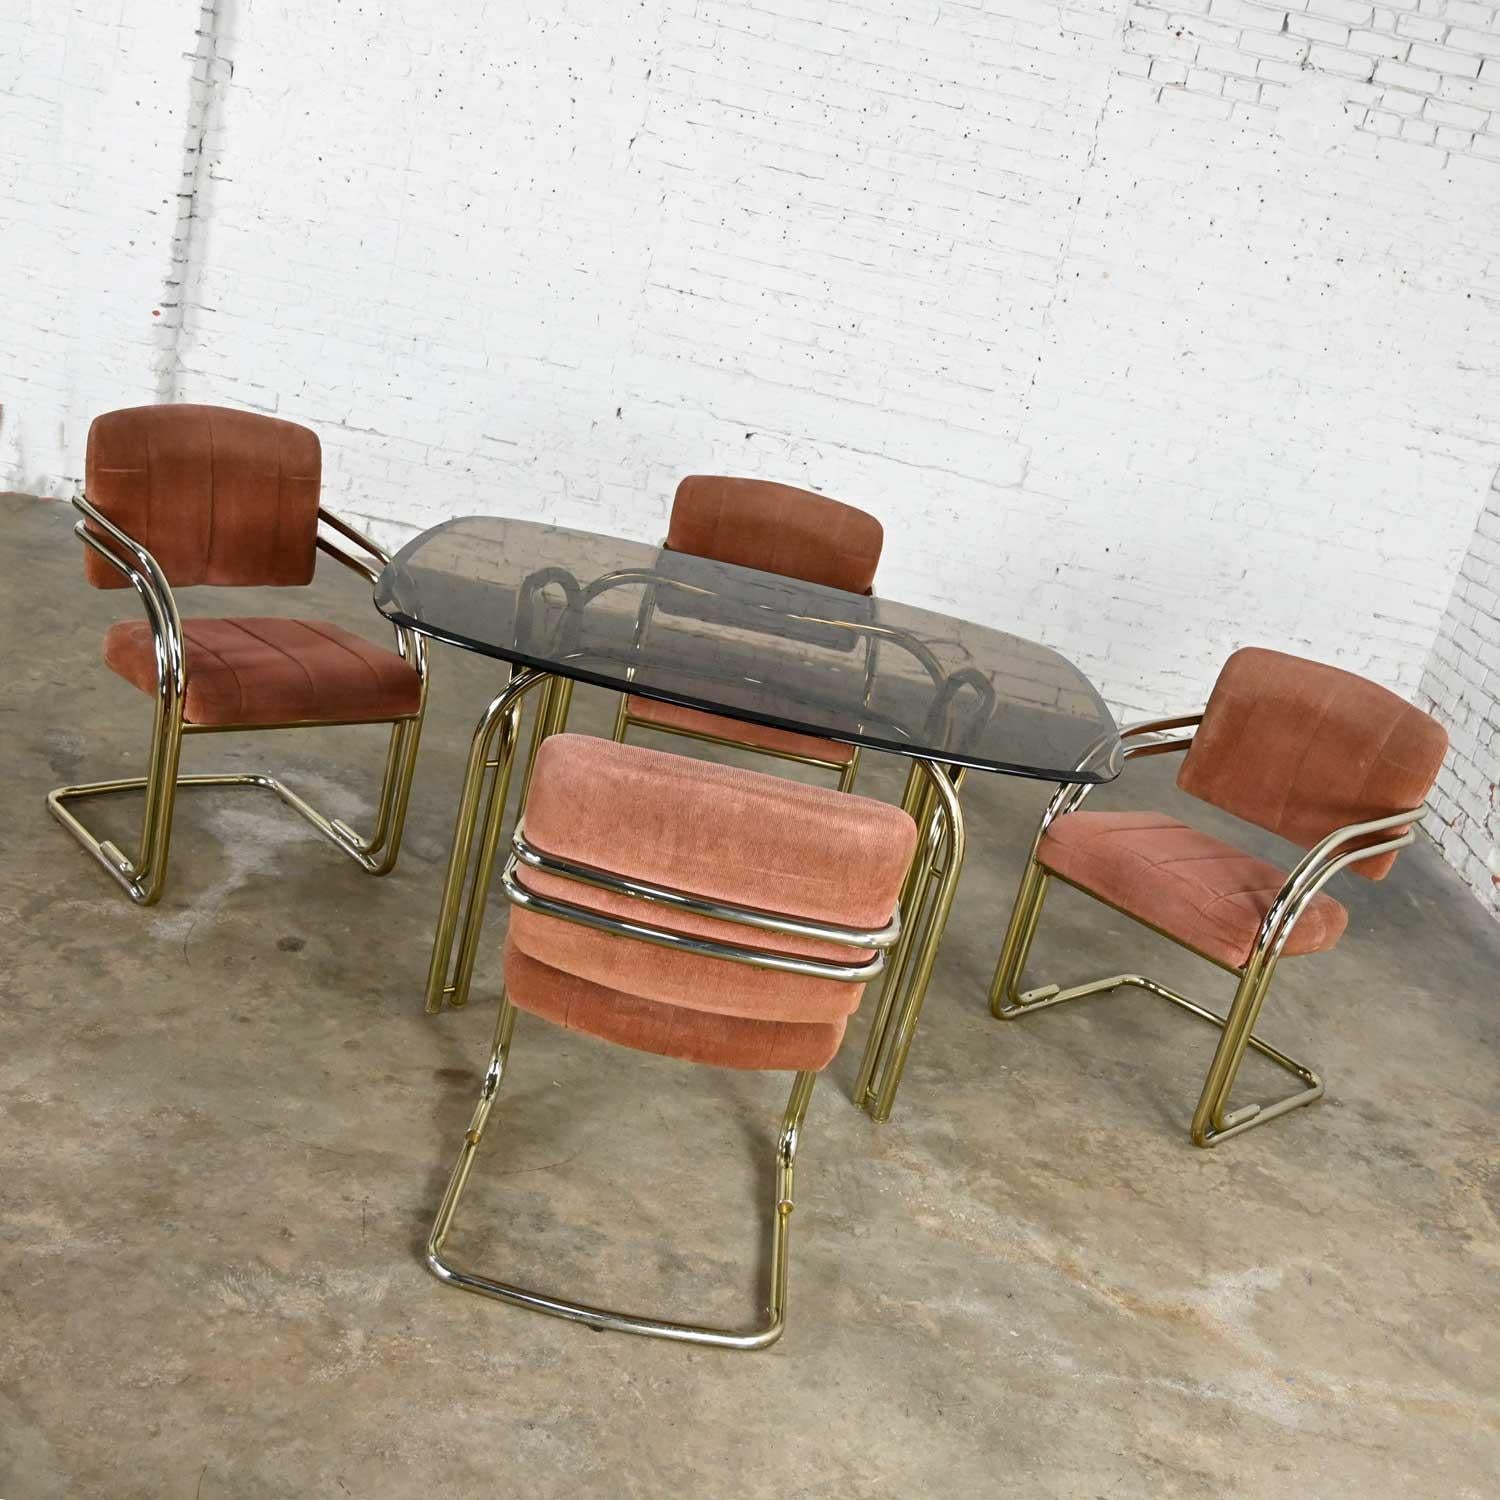 American Double Tube Brass Plate Cantilever Chairs Smoked Glass Top Table by Douglas Furn